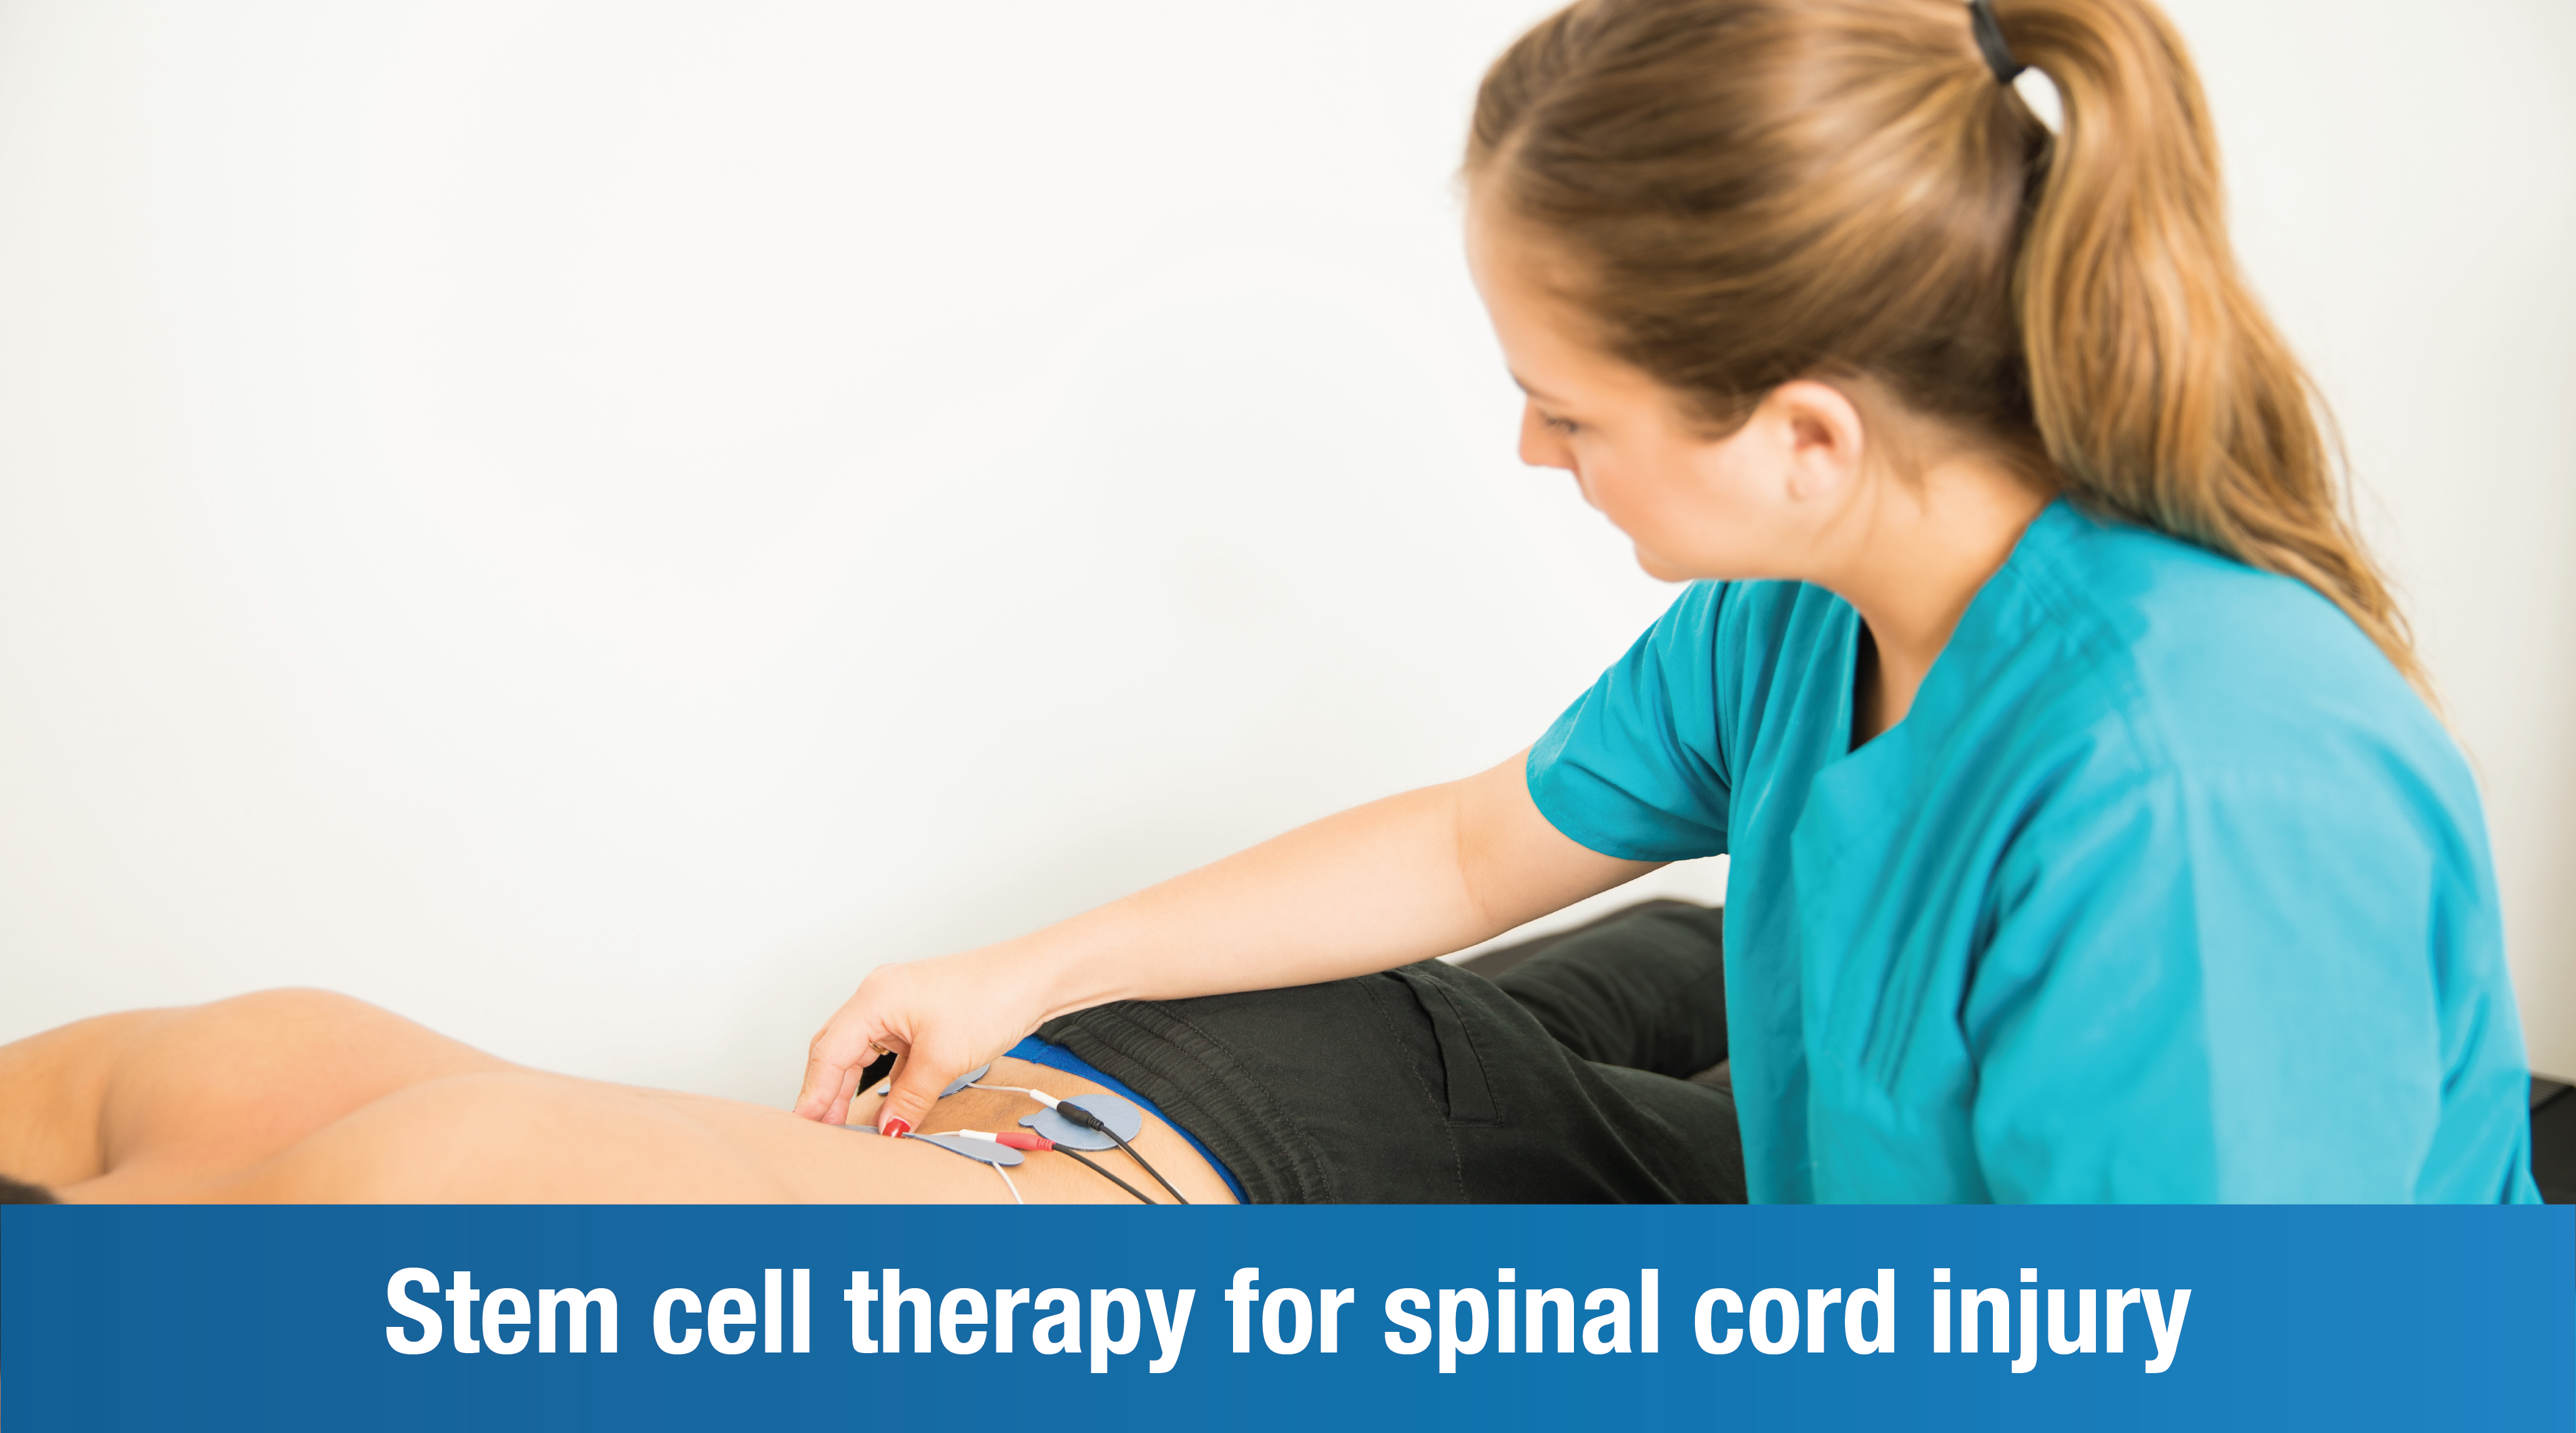 Stem cell therapy for spinal cord injury